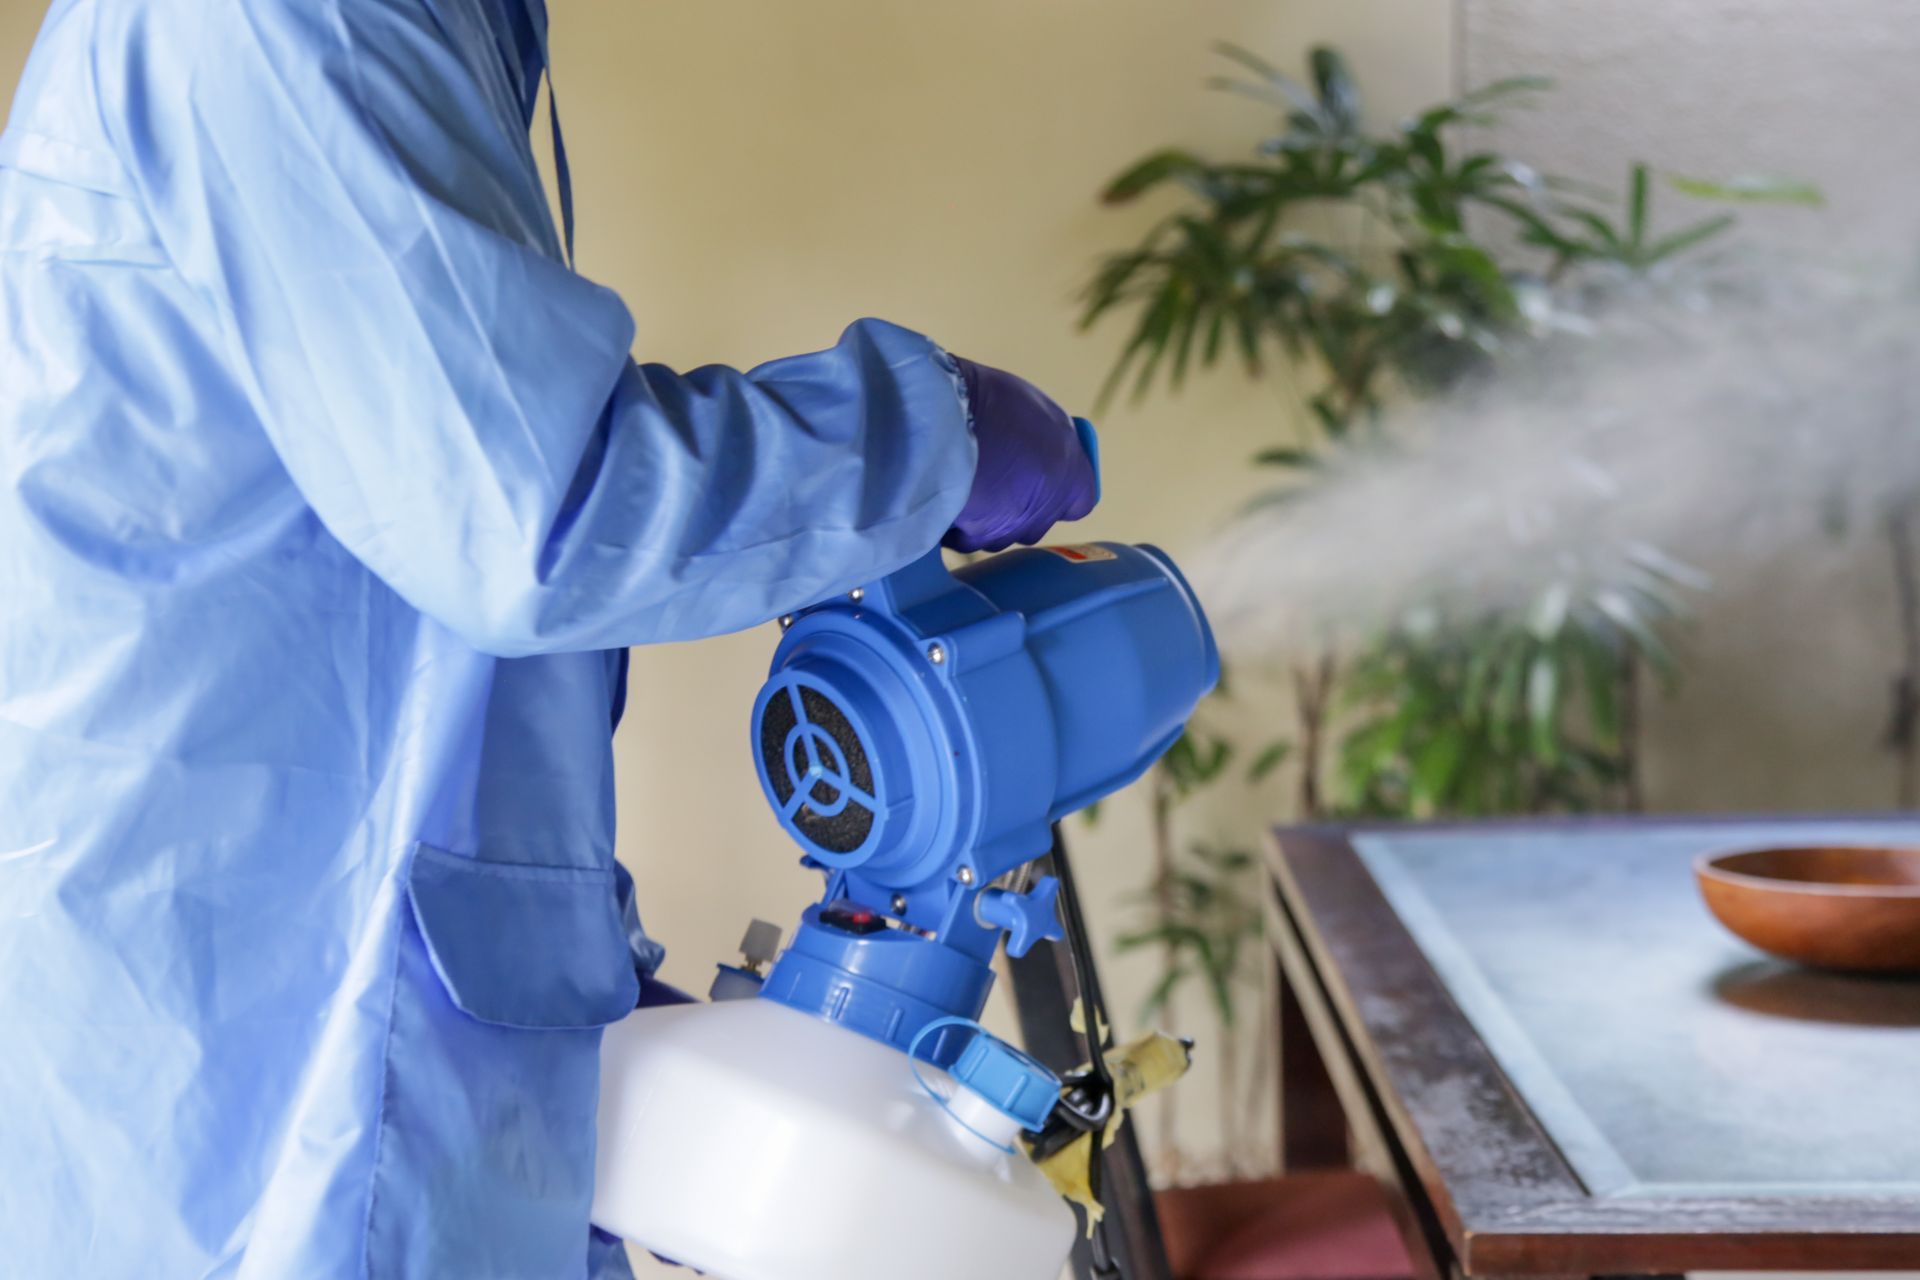 a man is spraying a room with a machine